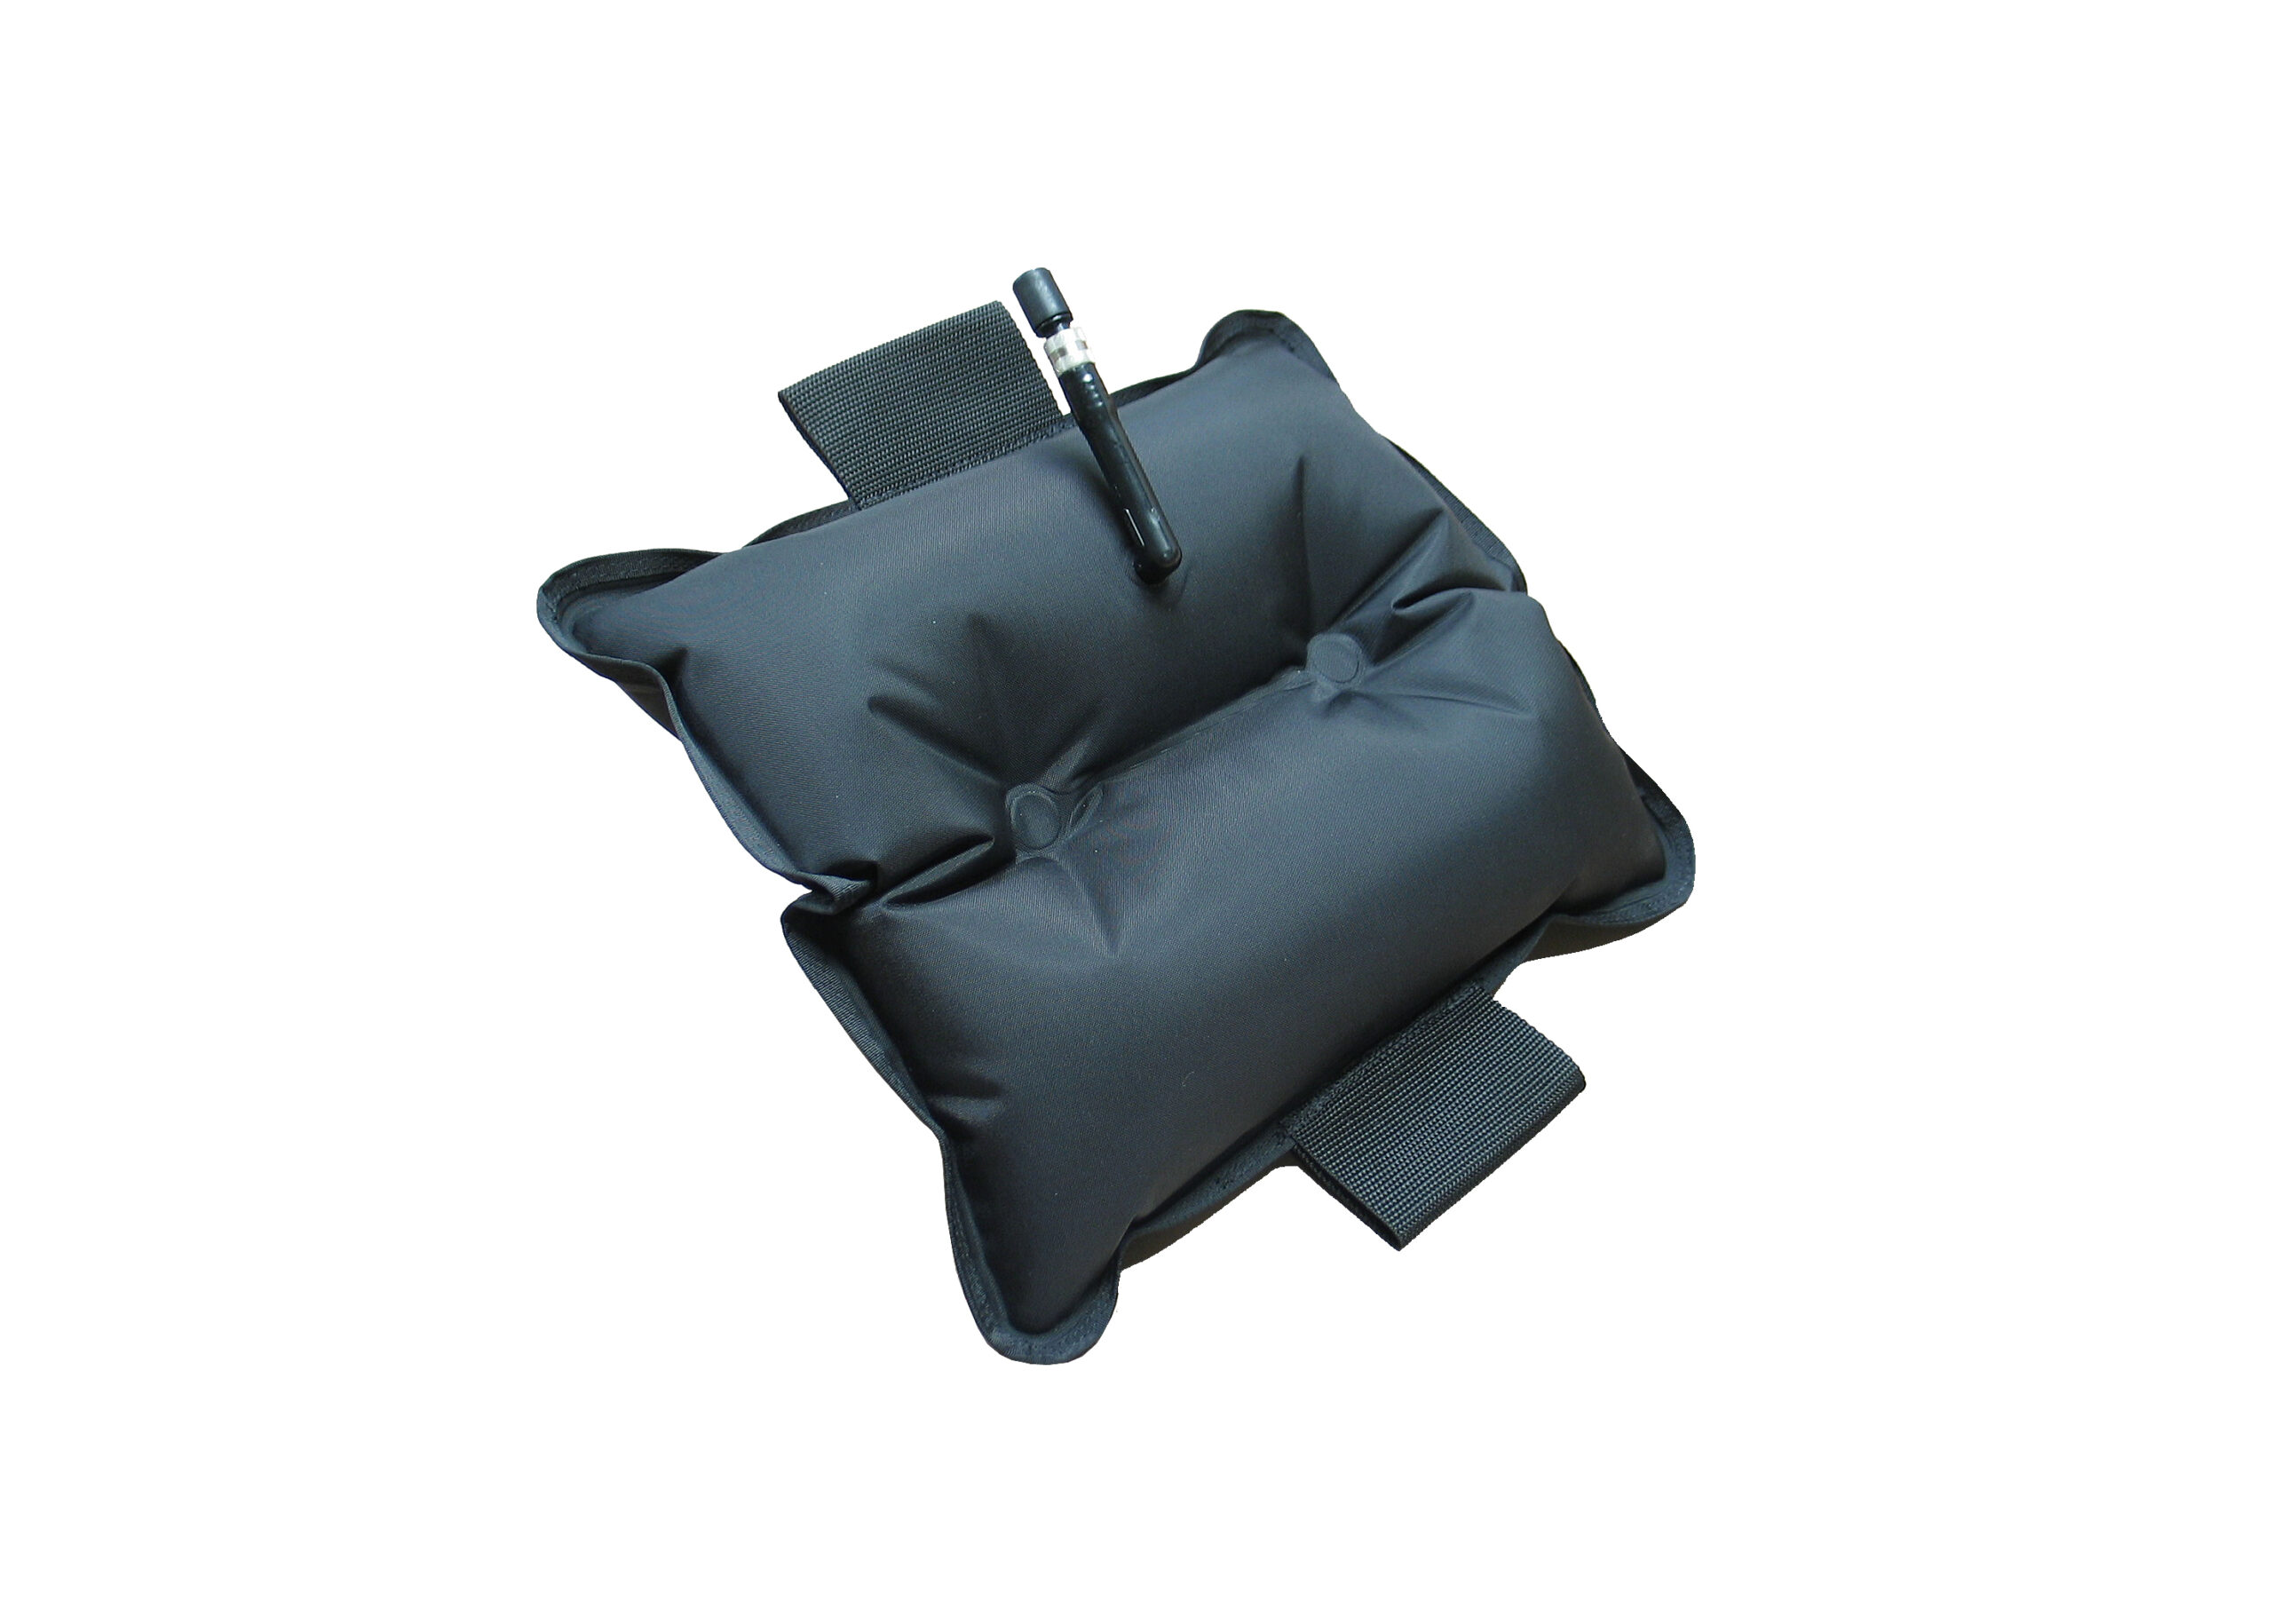 https://skedco.com/wp-content/uploads/2014/01/Inflatable-Chest-Pad-02-scaled.jpg